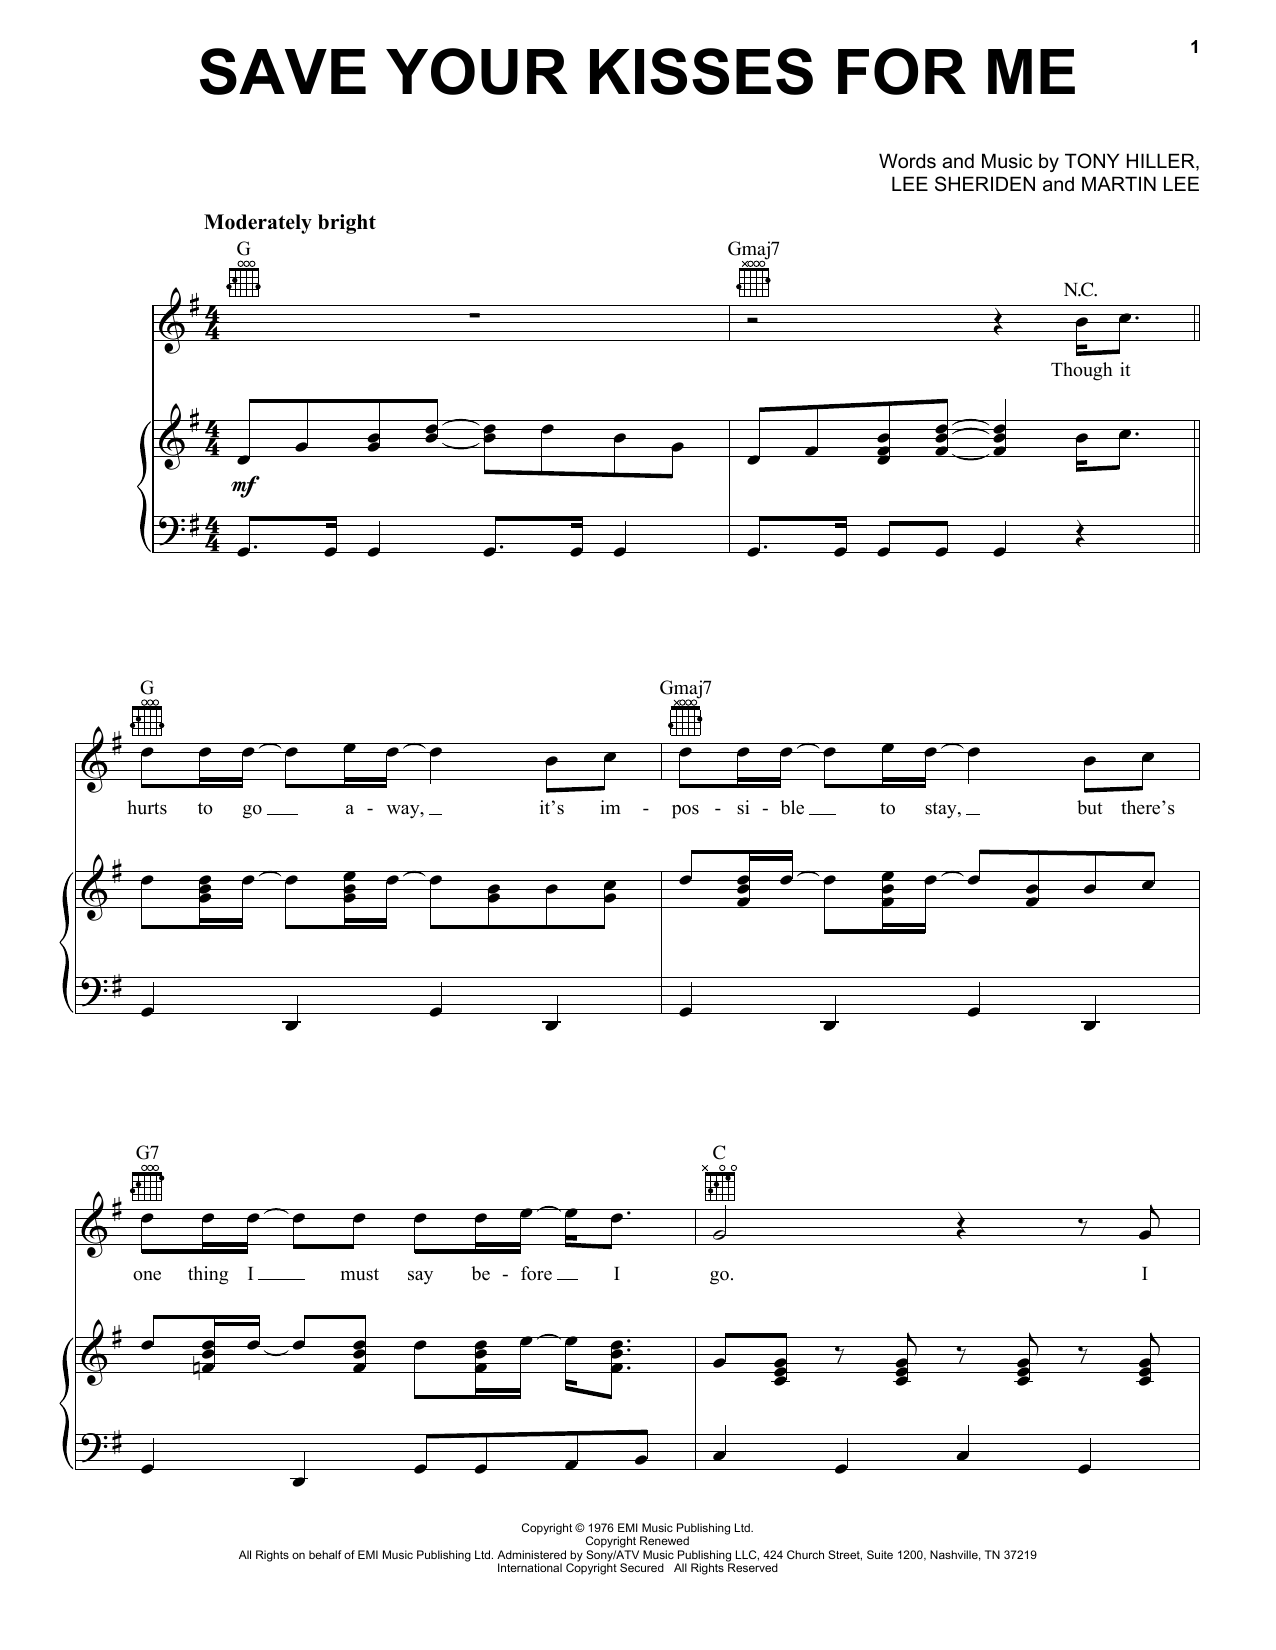 Download Brotherhood Of Man Save Your Kisses For Me Sheet Music